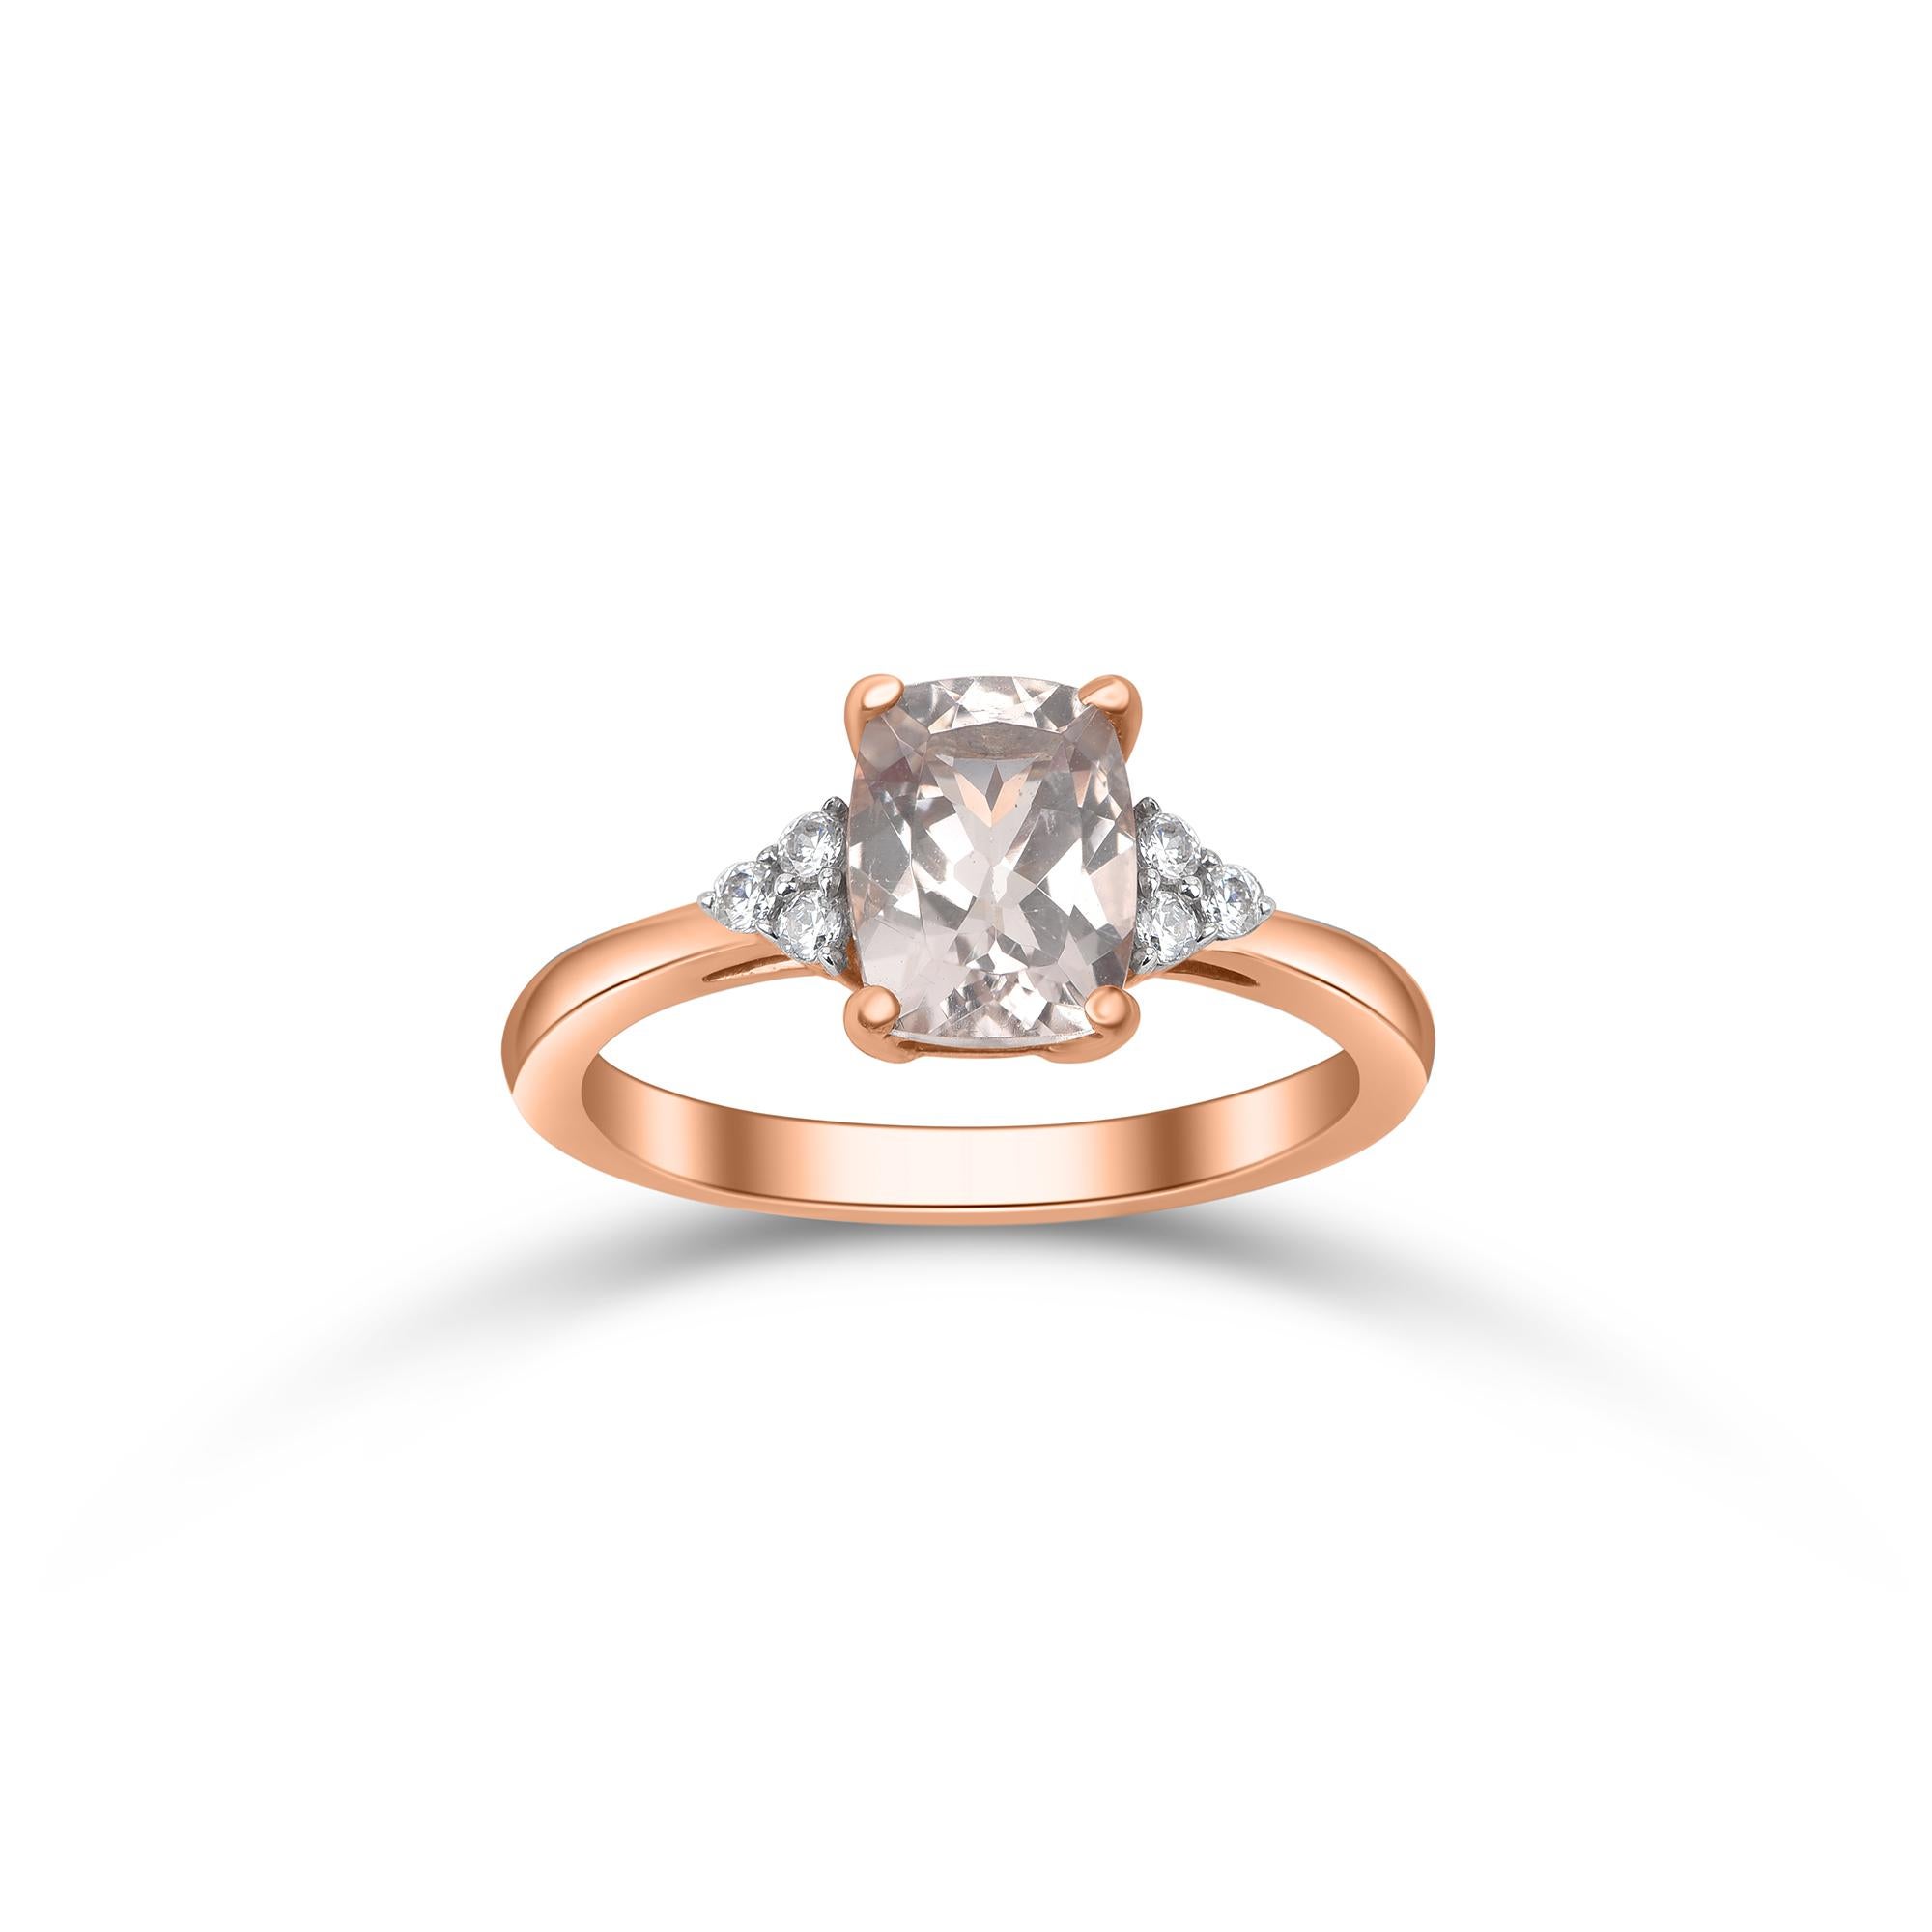 Made by our in-house artisans in 14 kt rose gold and studded with six brilliant and one morganite in prong setting. Truly, an exquisite gemstone diamond studded ring.  Diamonds are graded HI color and I2 clarity.

This style is Made to Order -